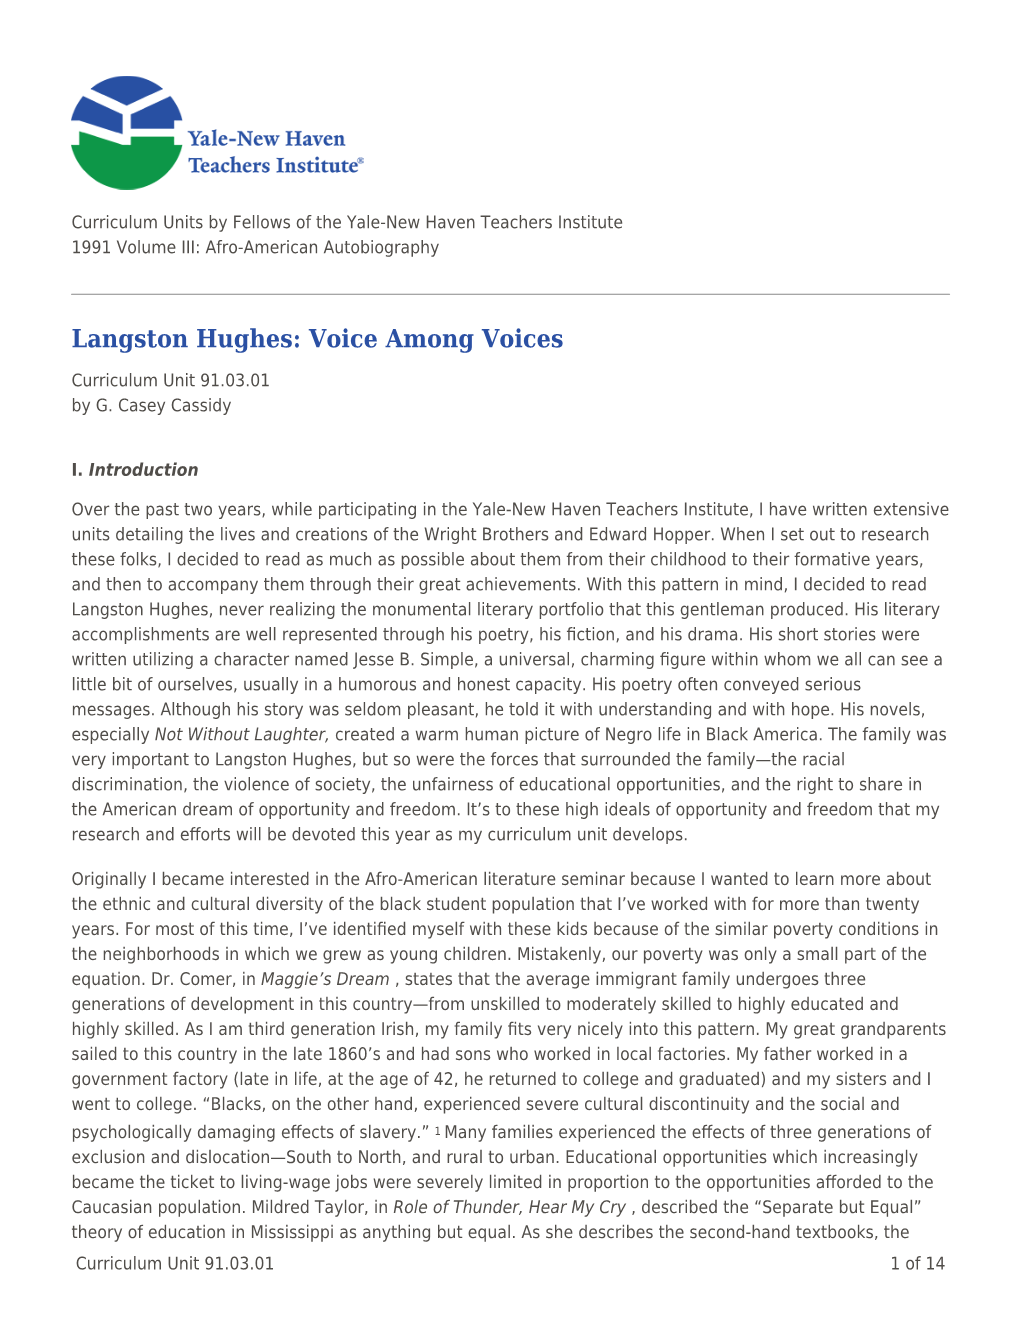 Langston Hughes: Voice Among Voices